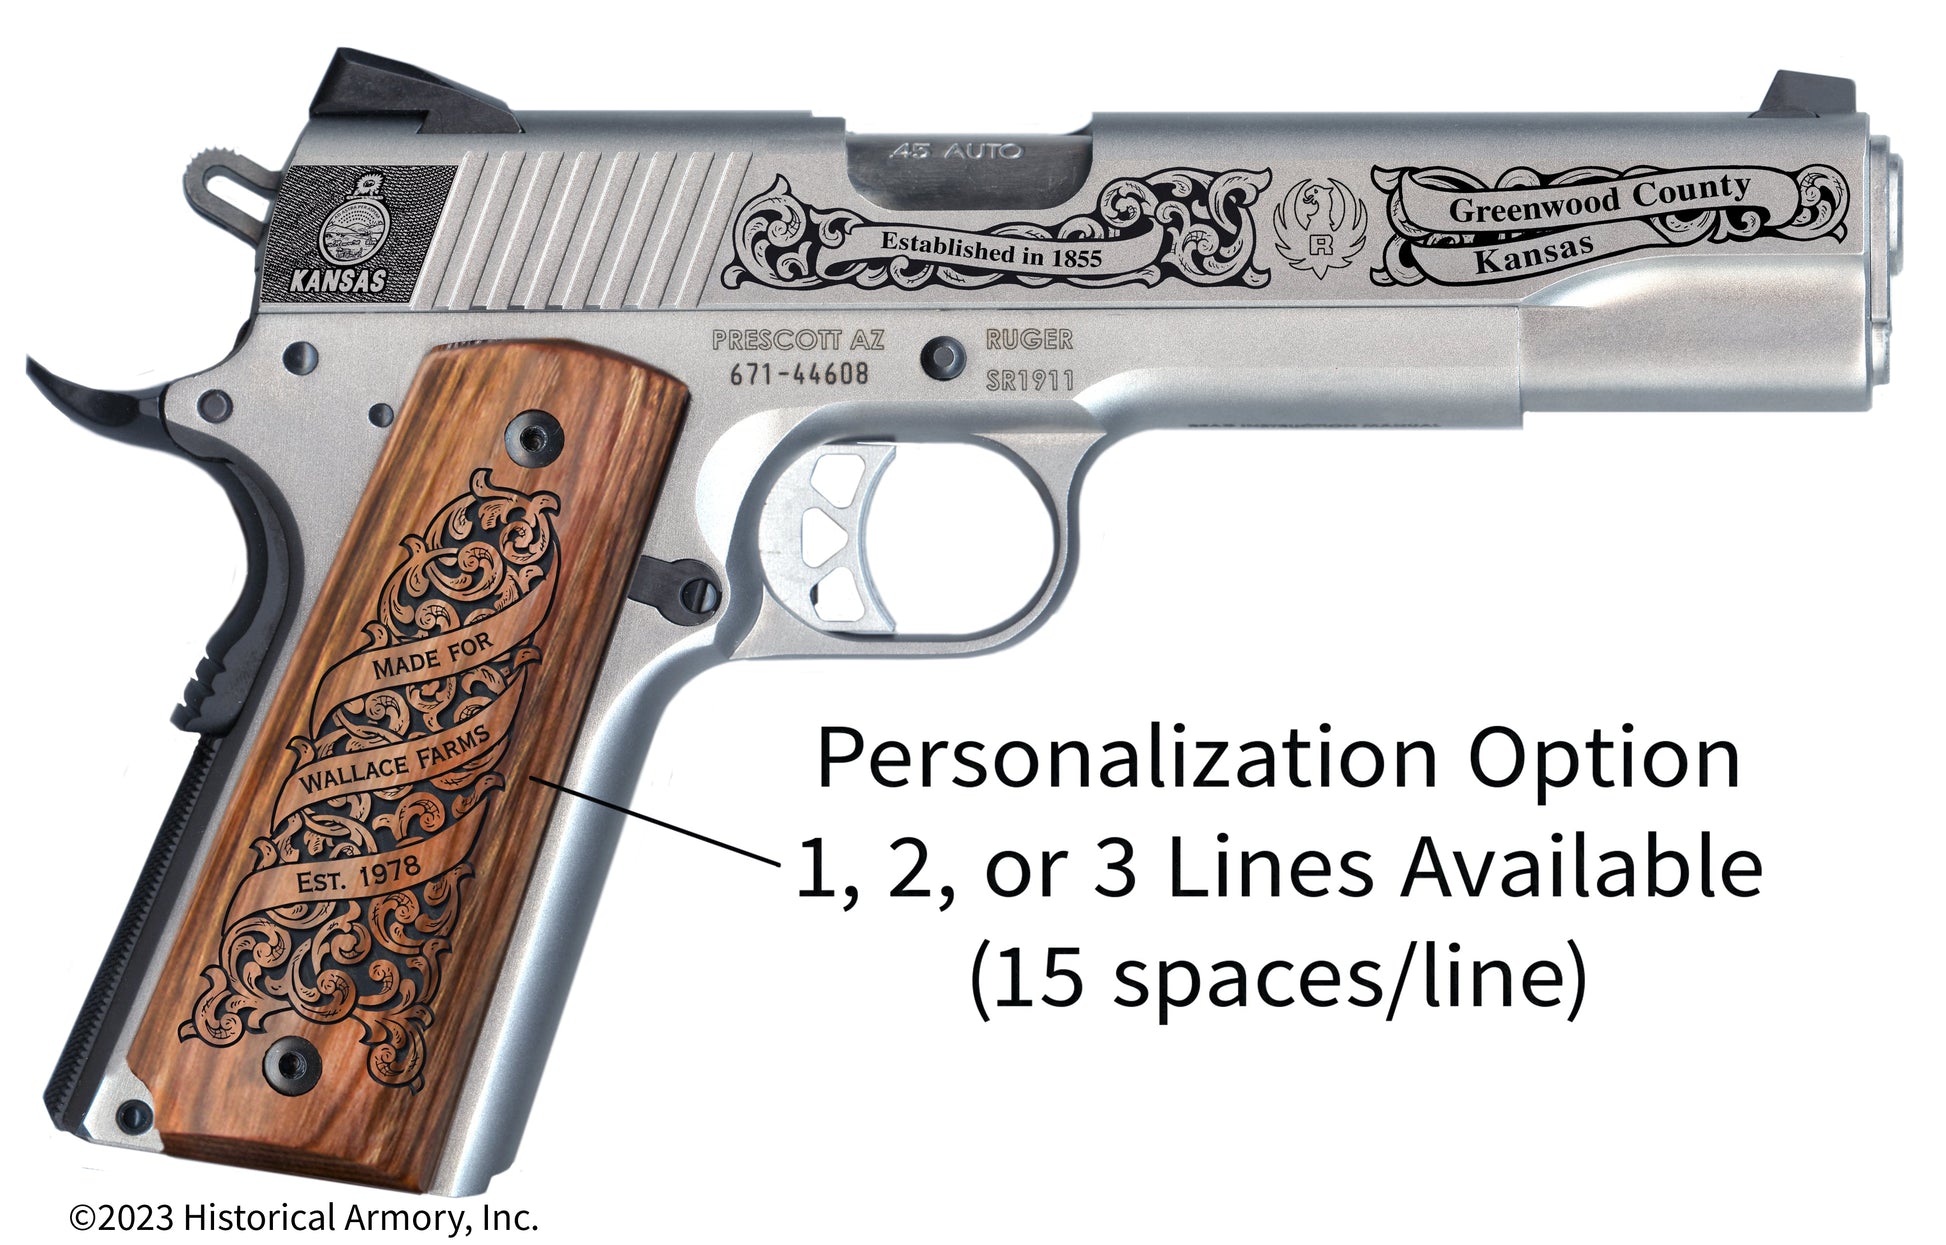 Greenwood County Kansas Personalized Engraved .45 Auto Ruger 1911